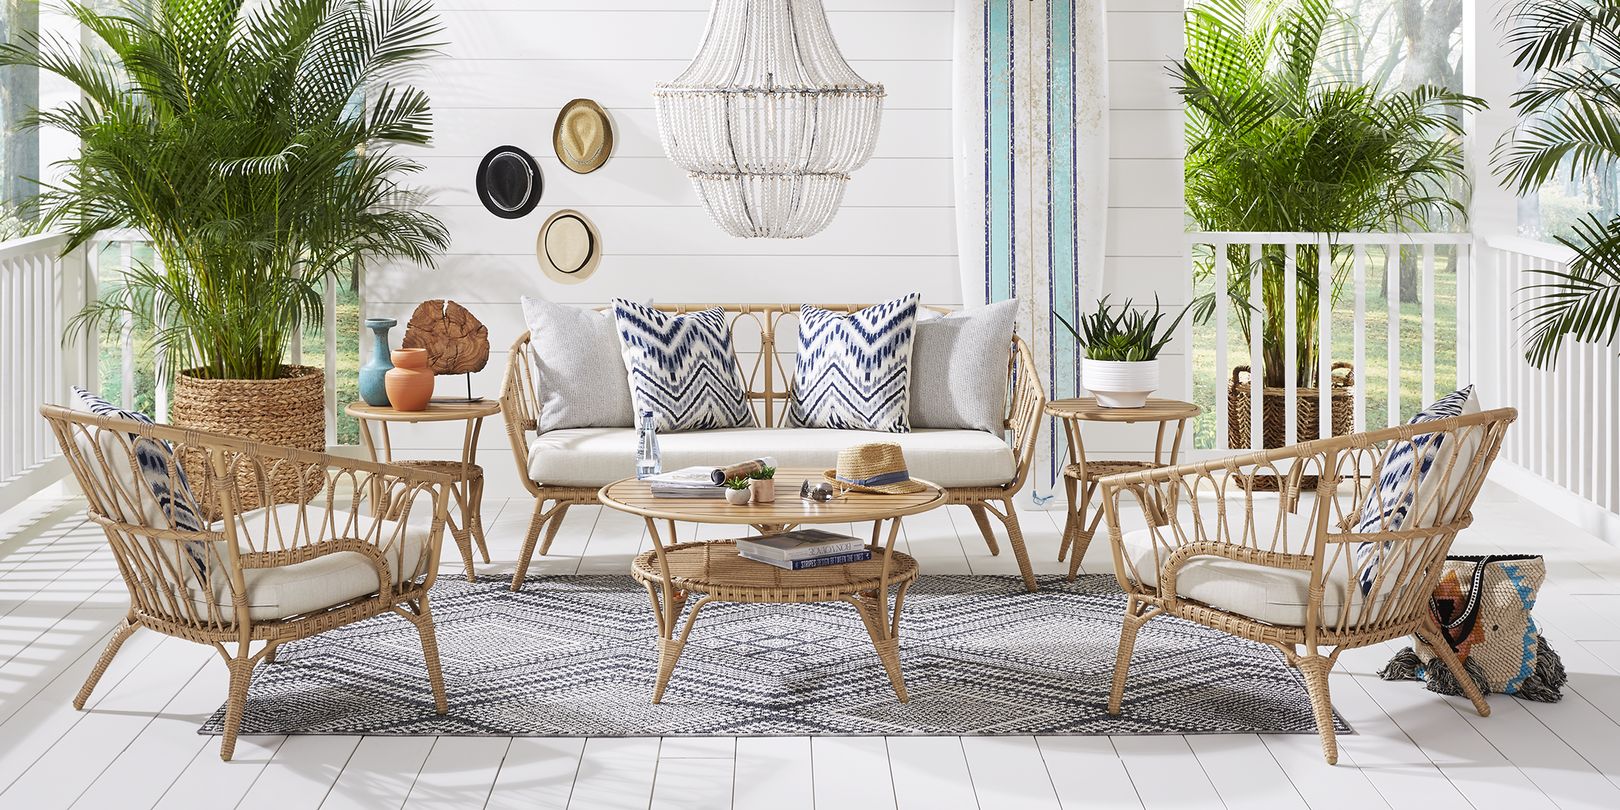 photo of a rattan outdoor loveseat and chairs with coordinating coffee and end tables